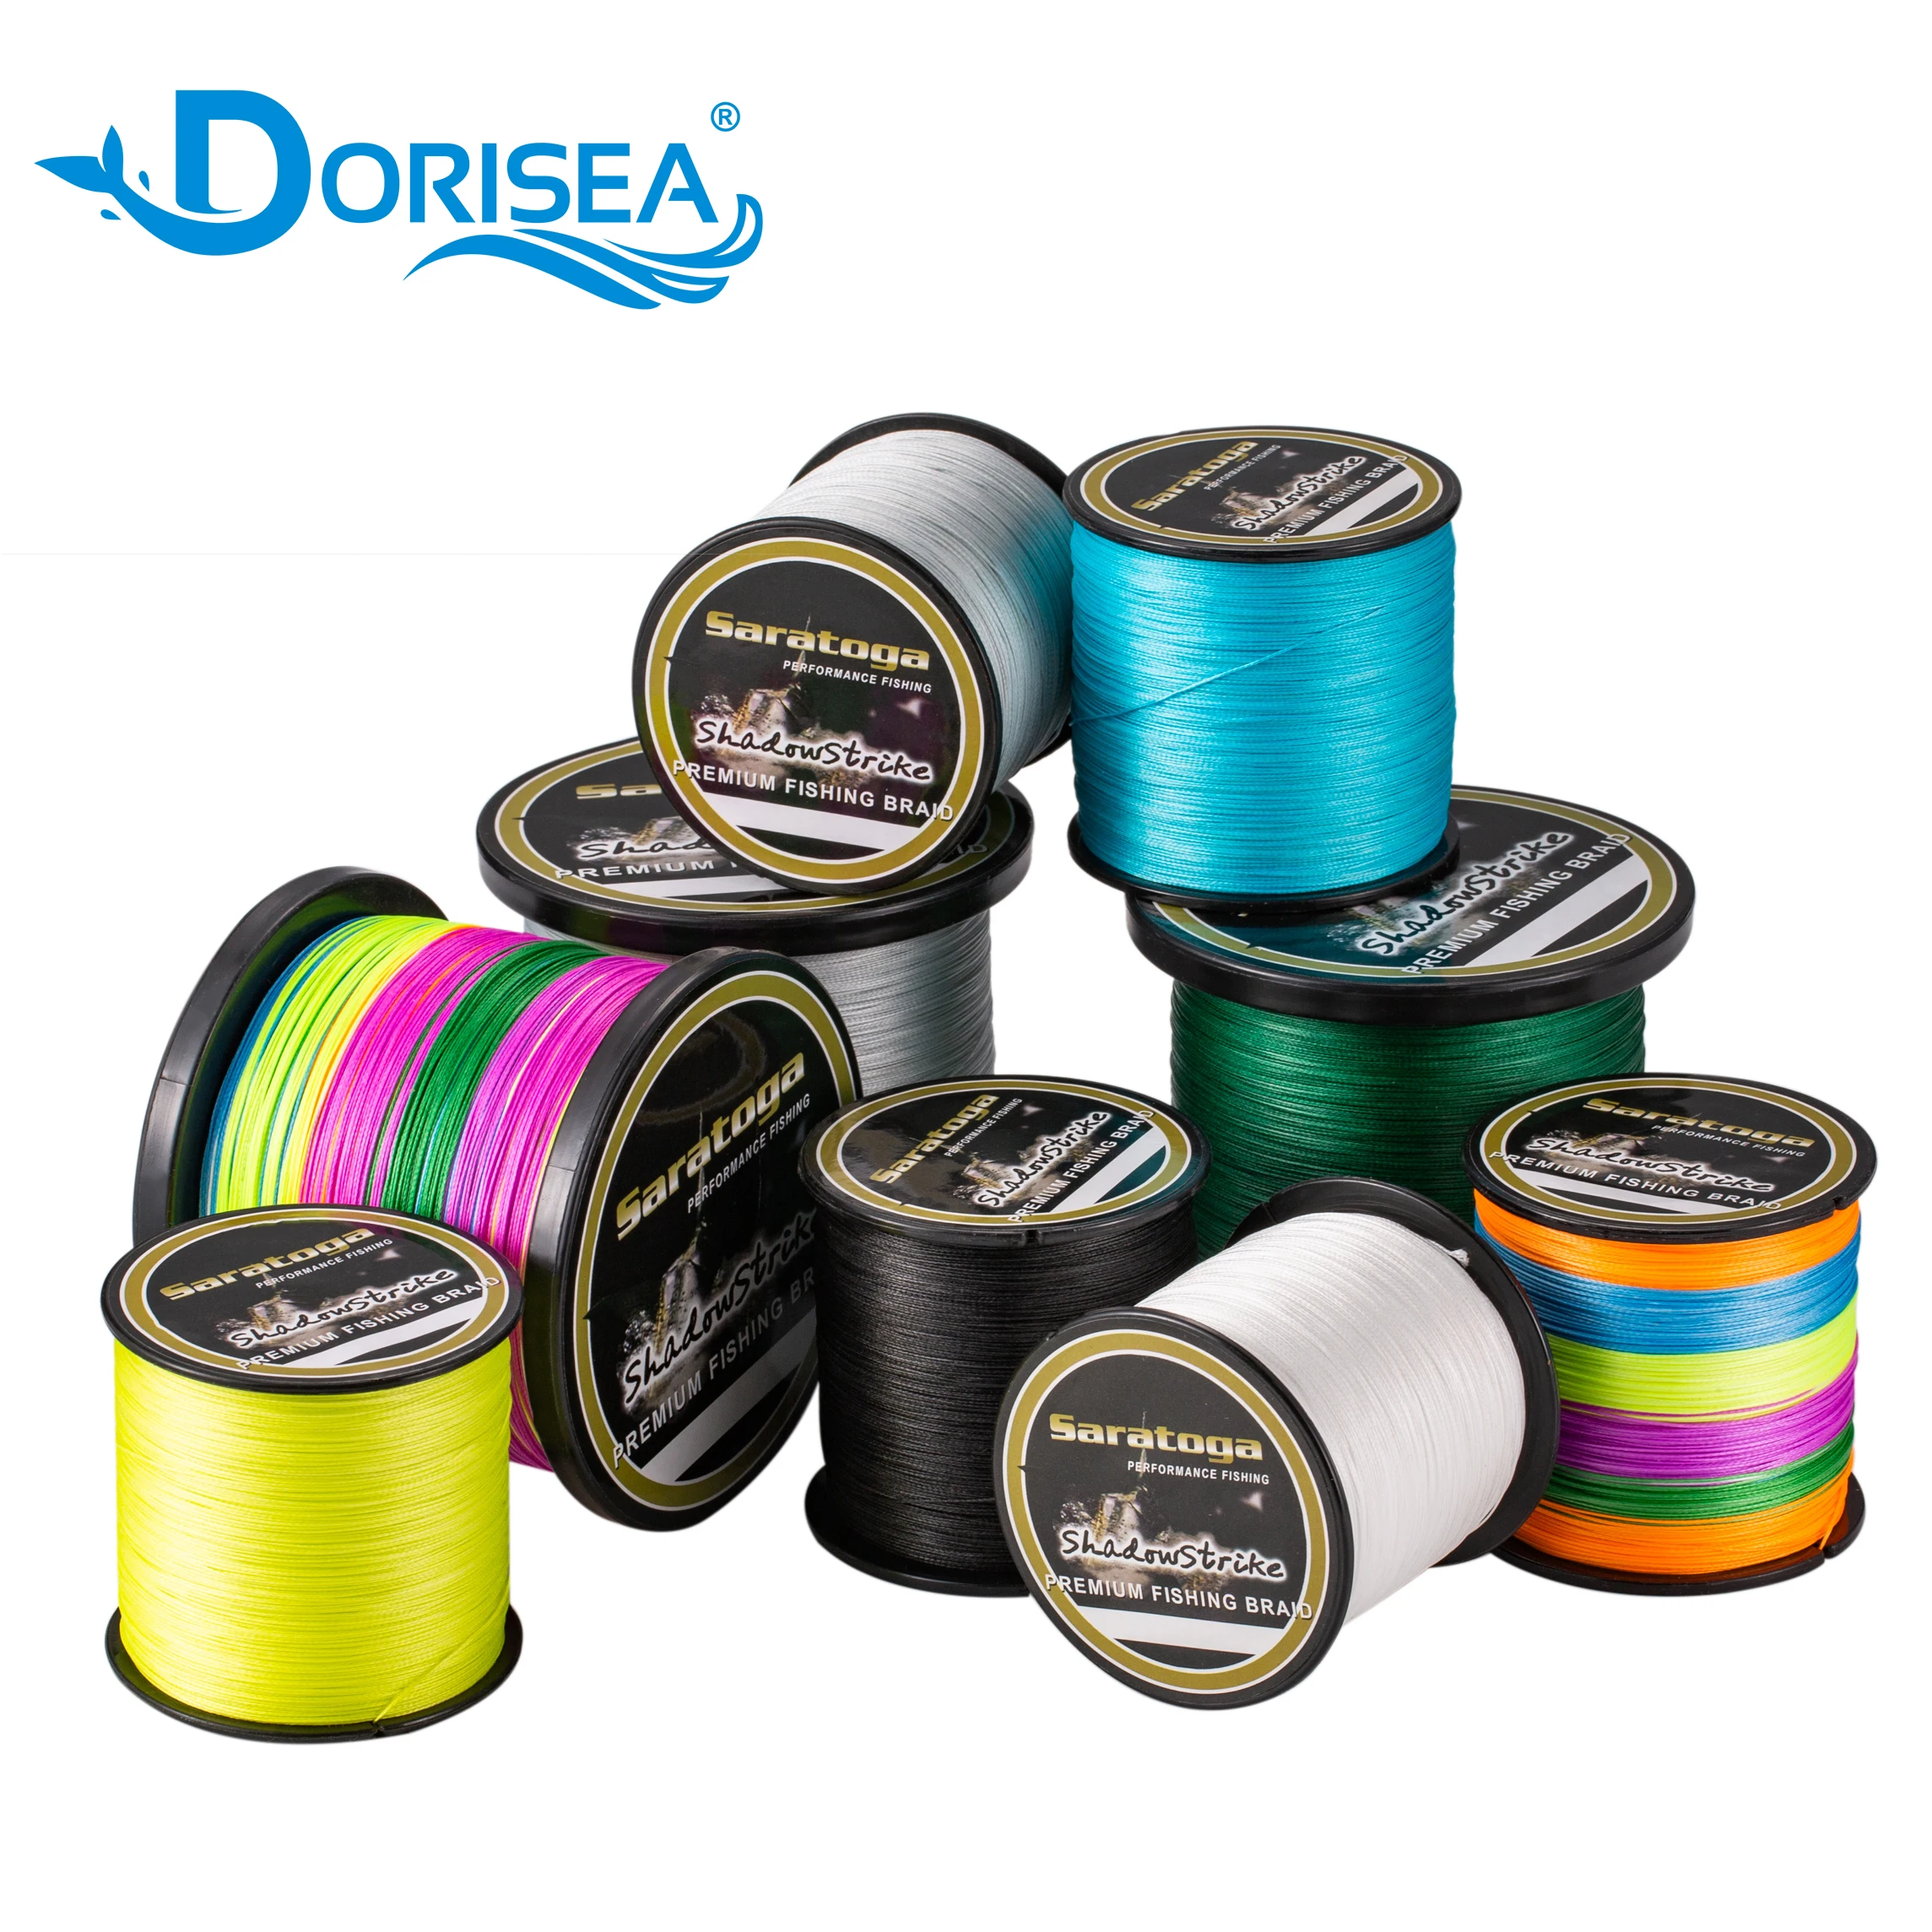 

DORISEA SARATOGA 8 Strands 100M-2000M 6-300LB 100% PE Braided Multifilament Fishing Line,all colors available, Black,blue,green,yellow,white,red,grey, multicolor and so on